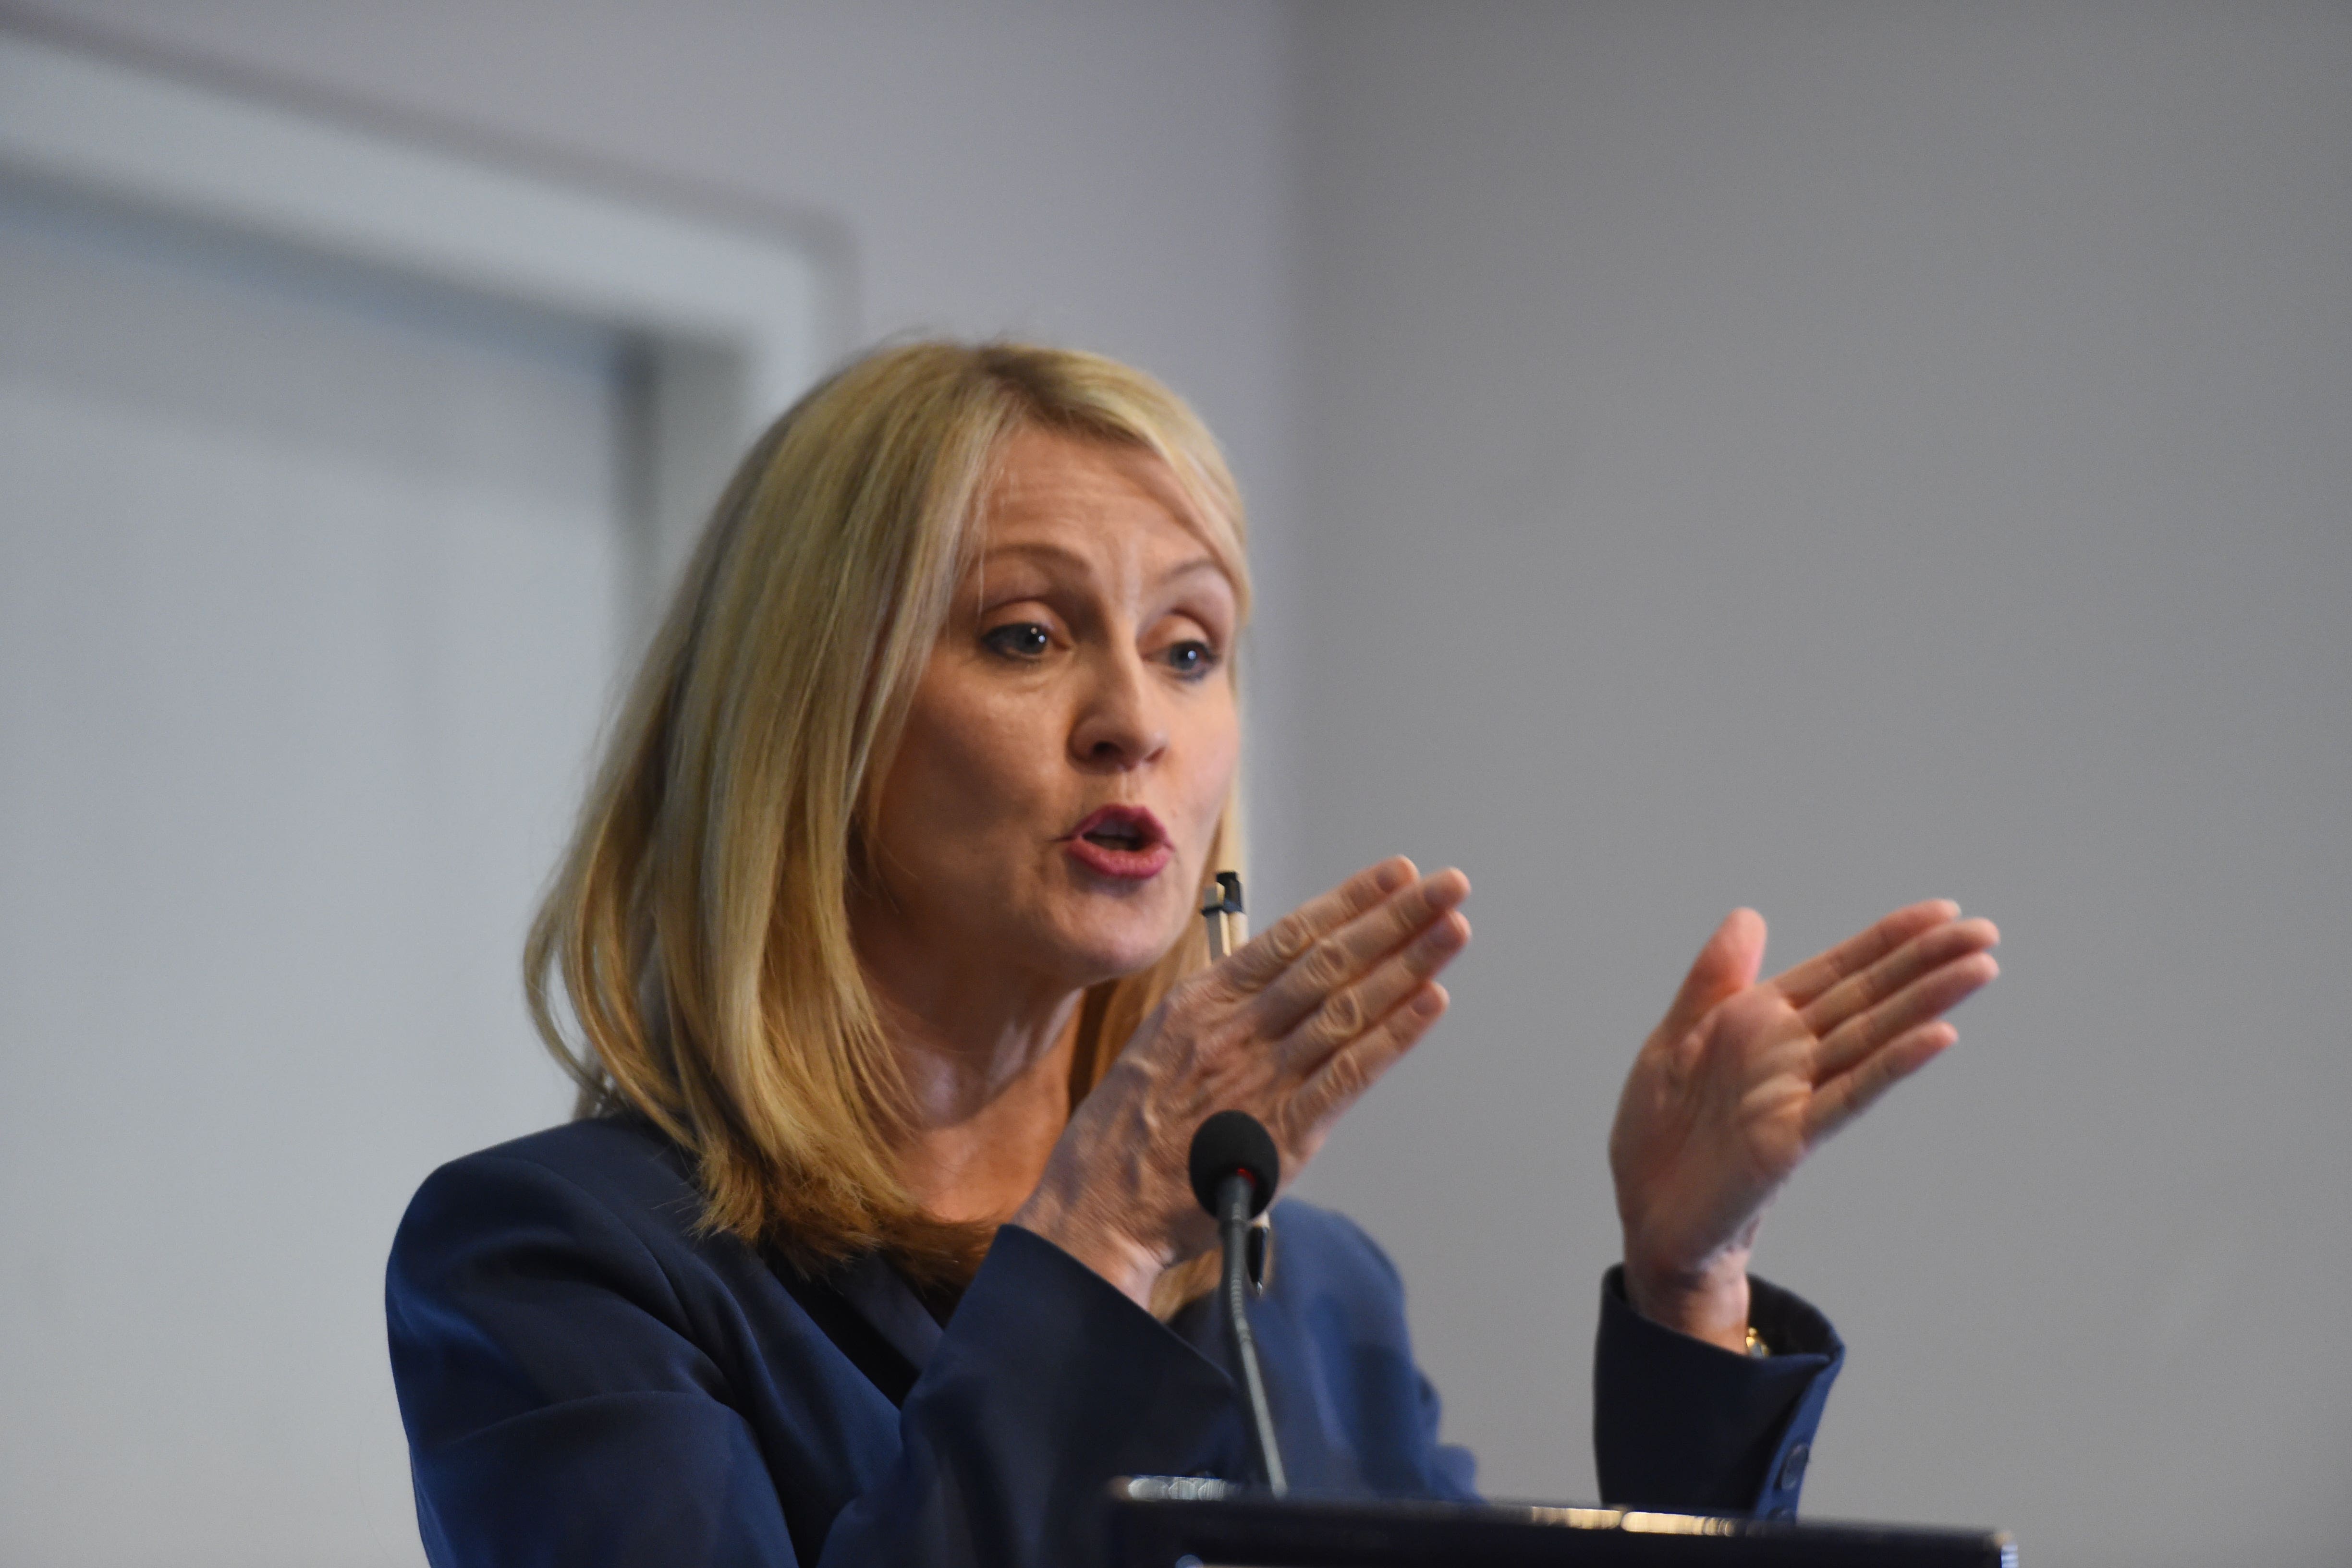 Esther McVey has proposed a ban on rainbow lanyards in the civil service